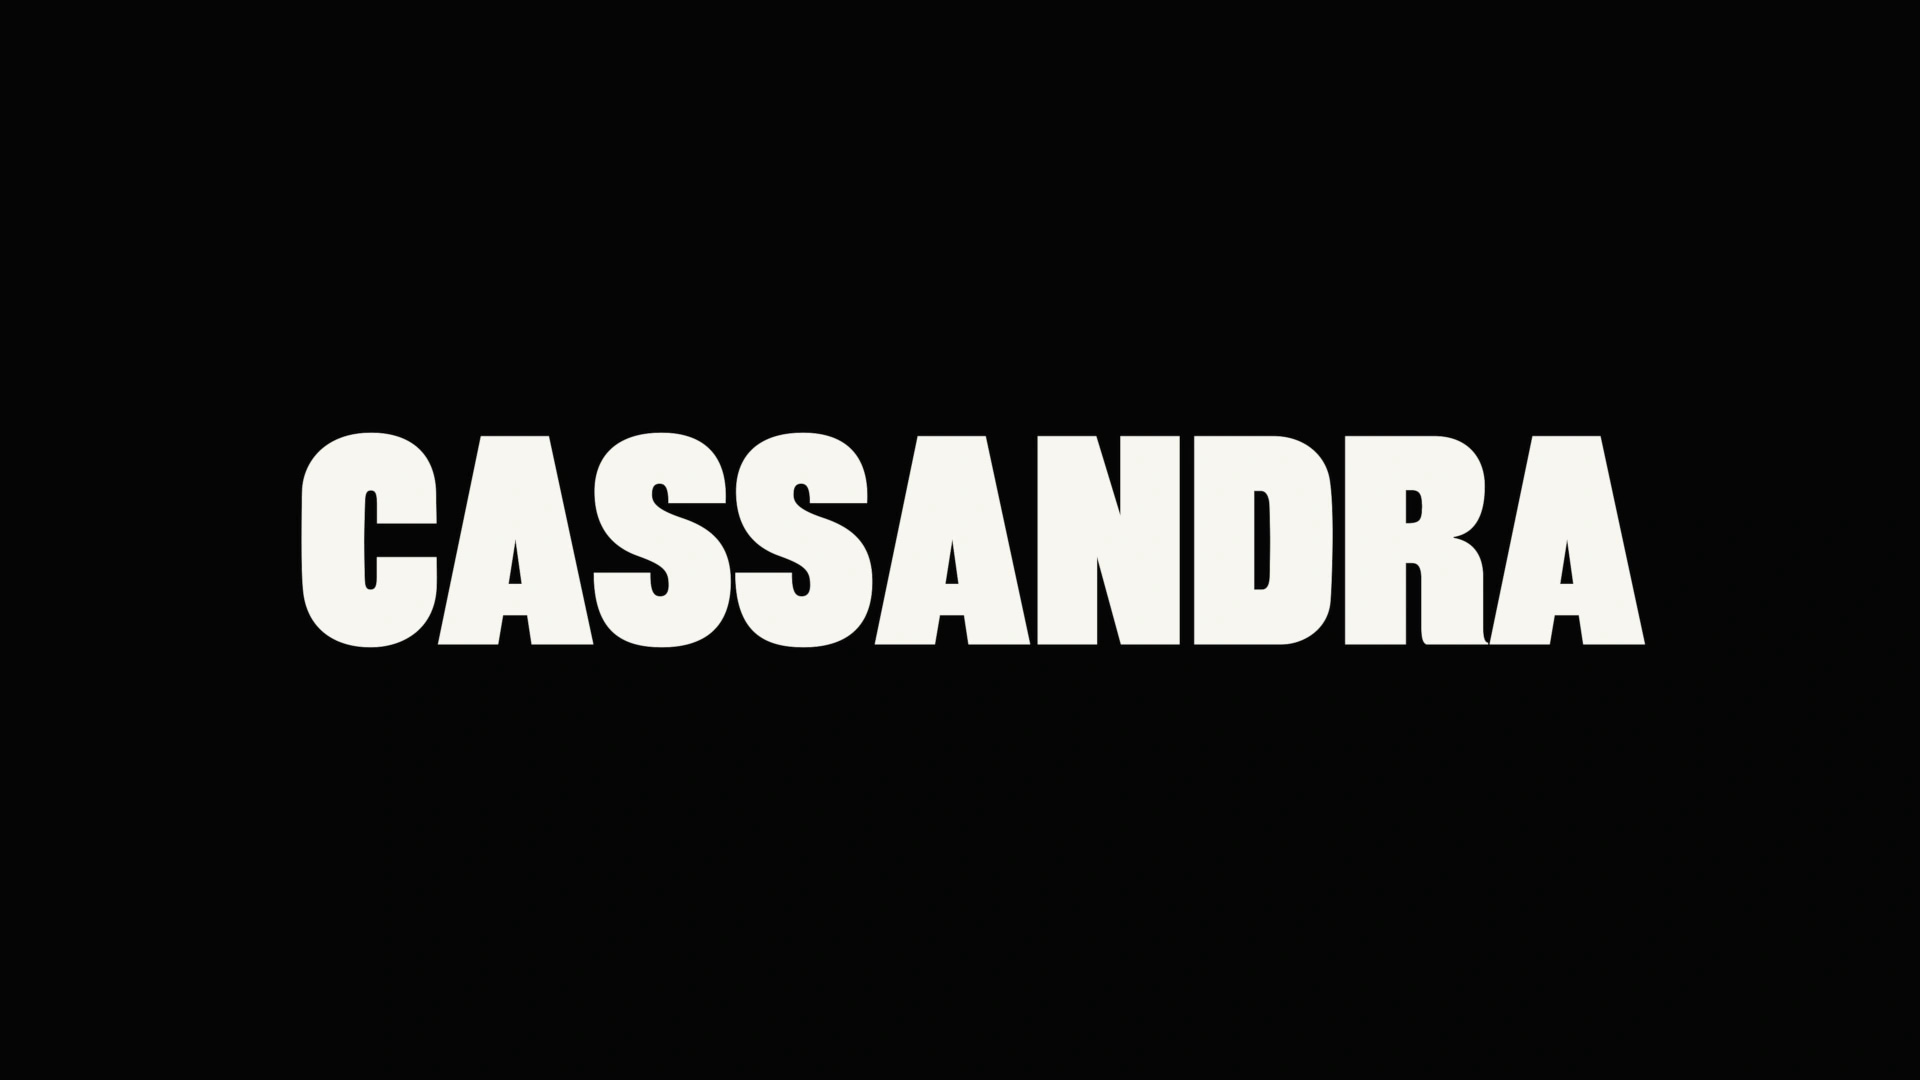 Image taken from the Cassandra title sequence. Graphic composition with the word Cassandra in the center.